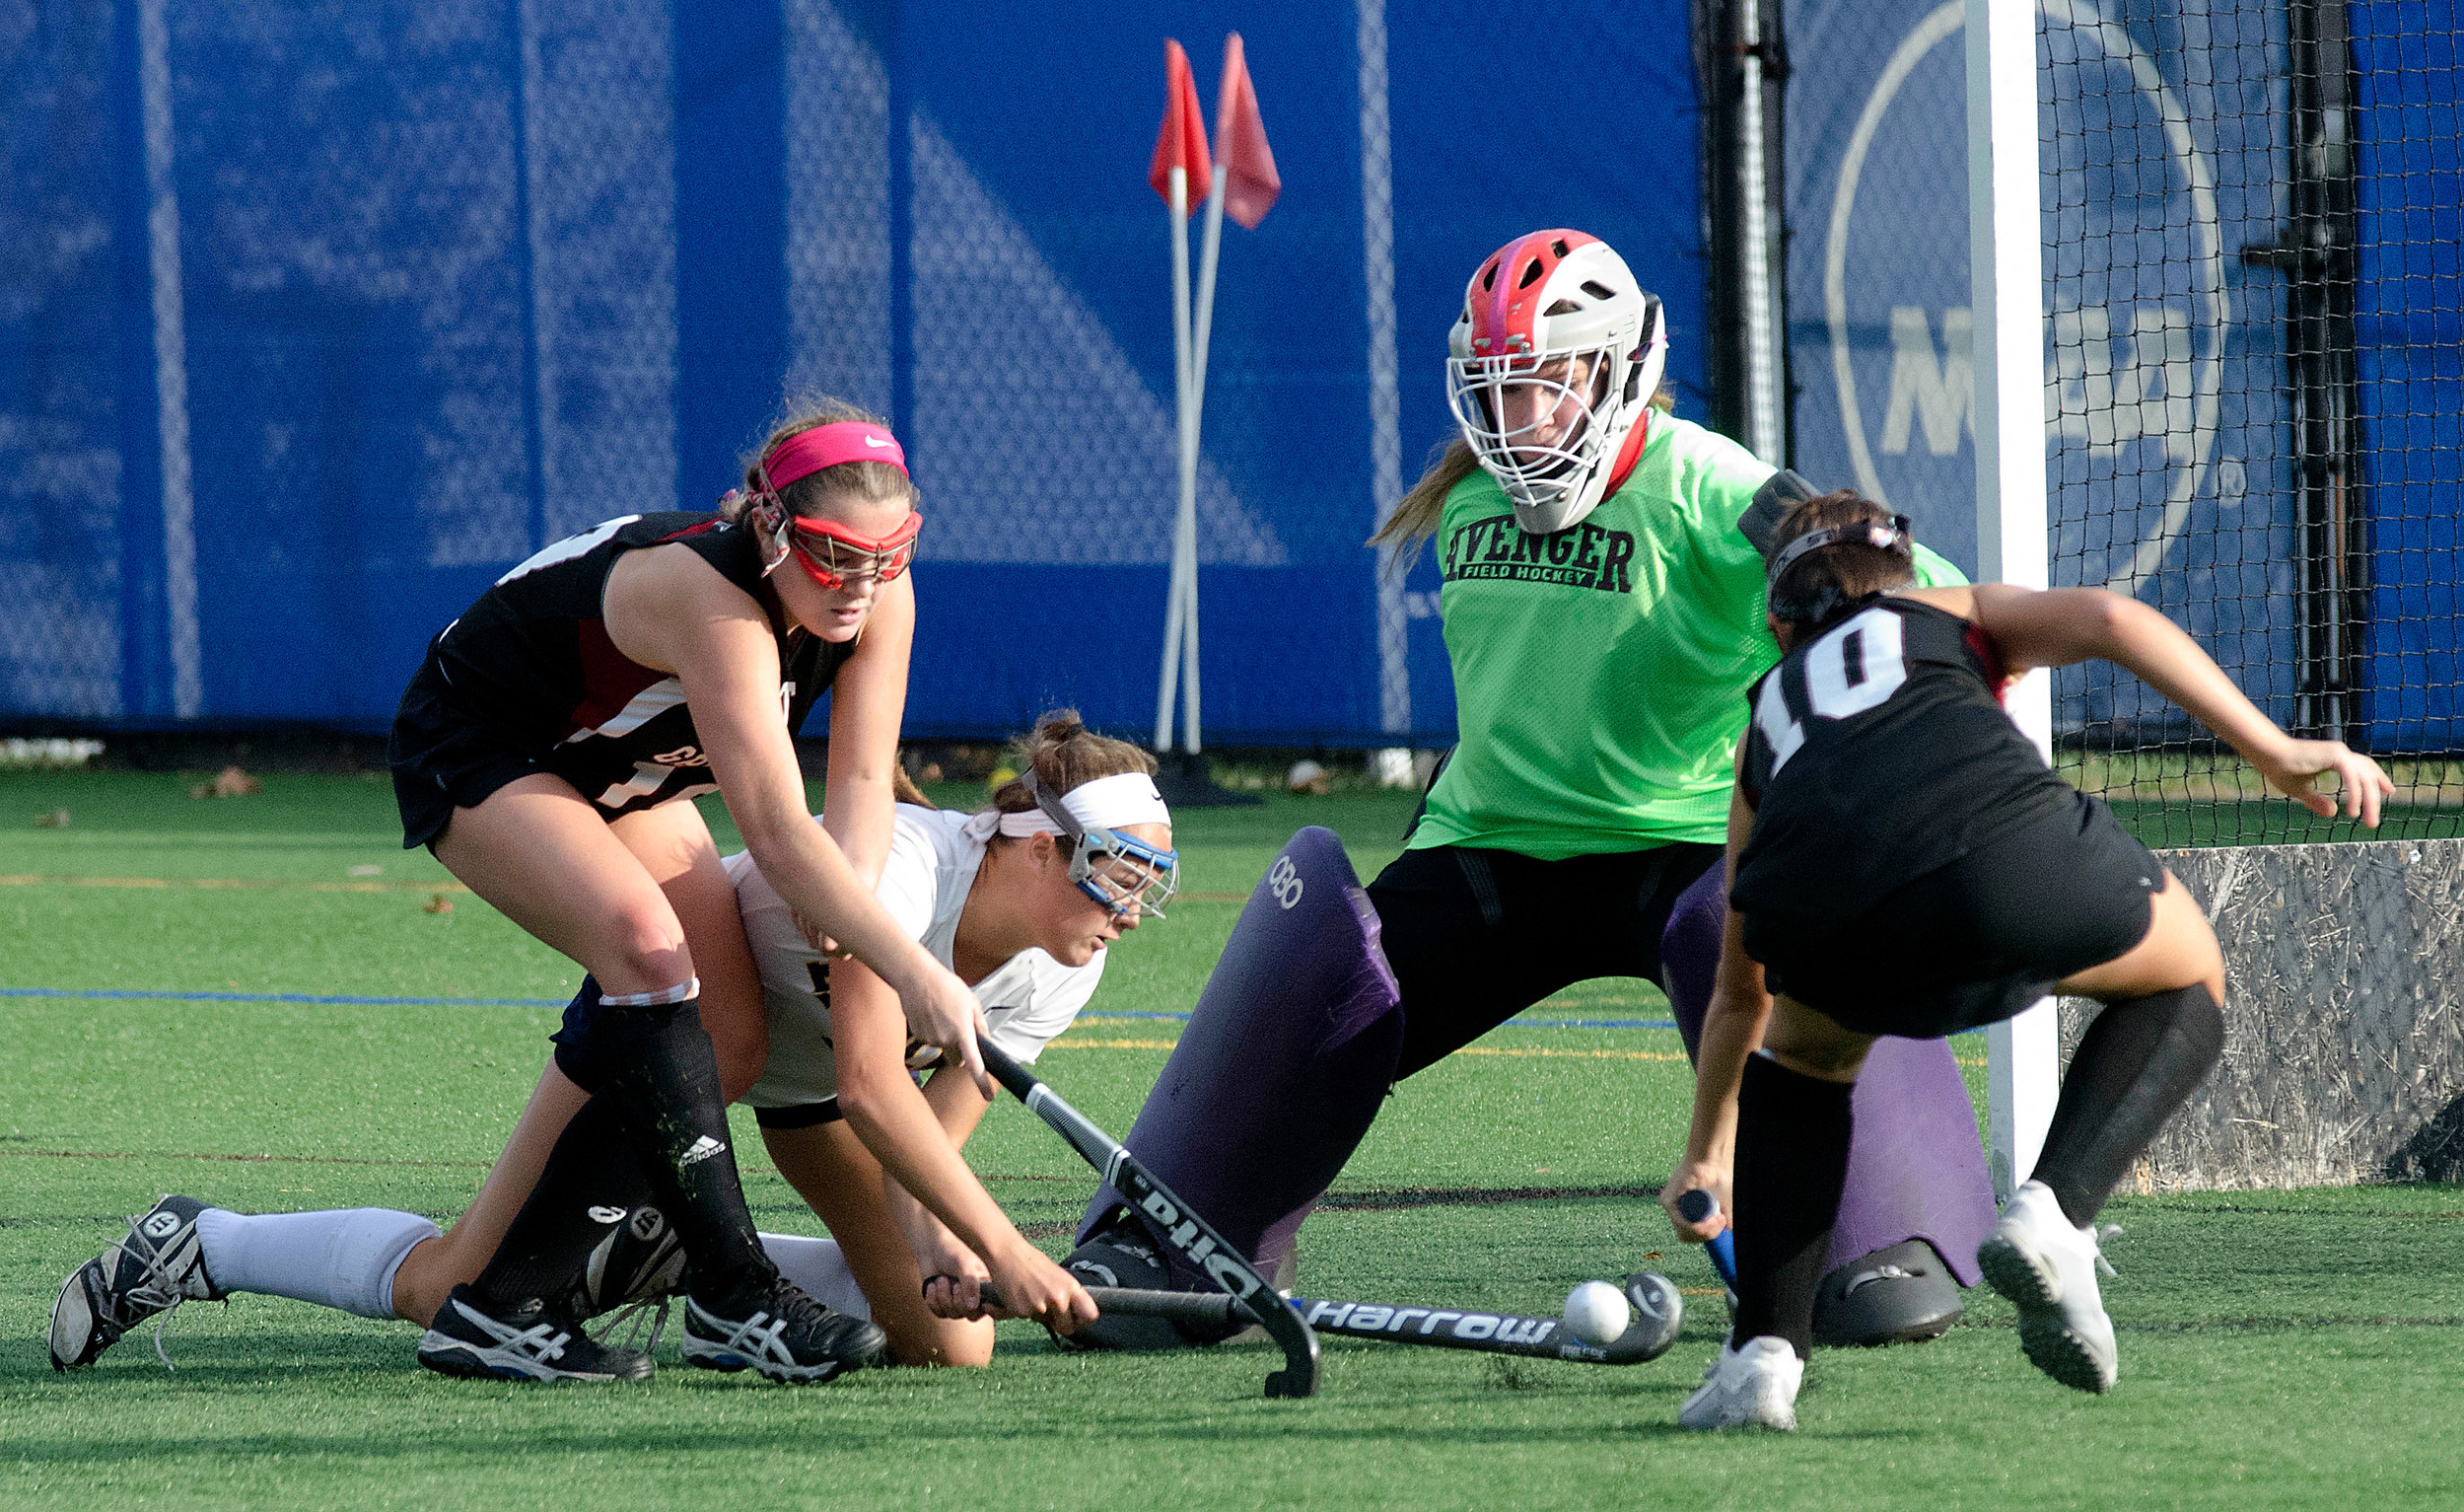 Elizabeth Lewis looks to end the game as she takes a hack at the ball while being pushed down by an Avenger in overtime.